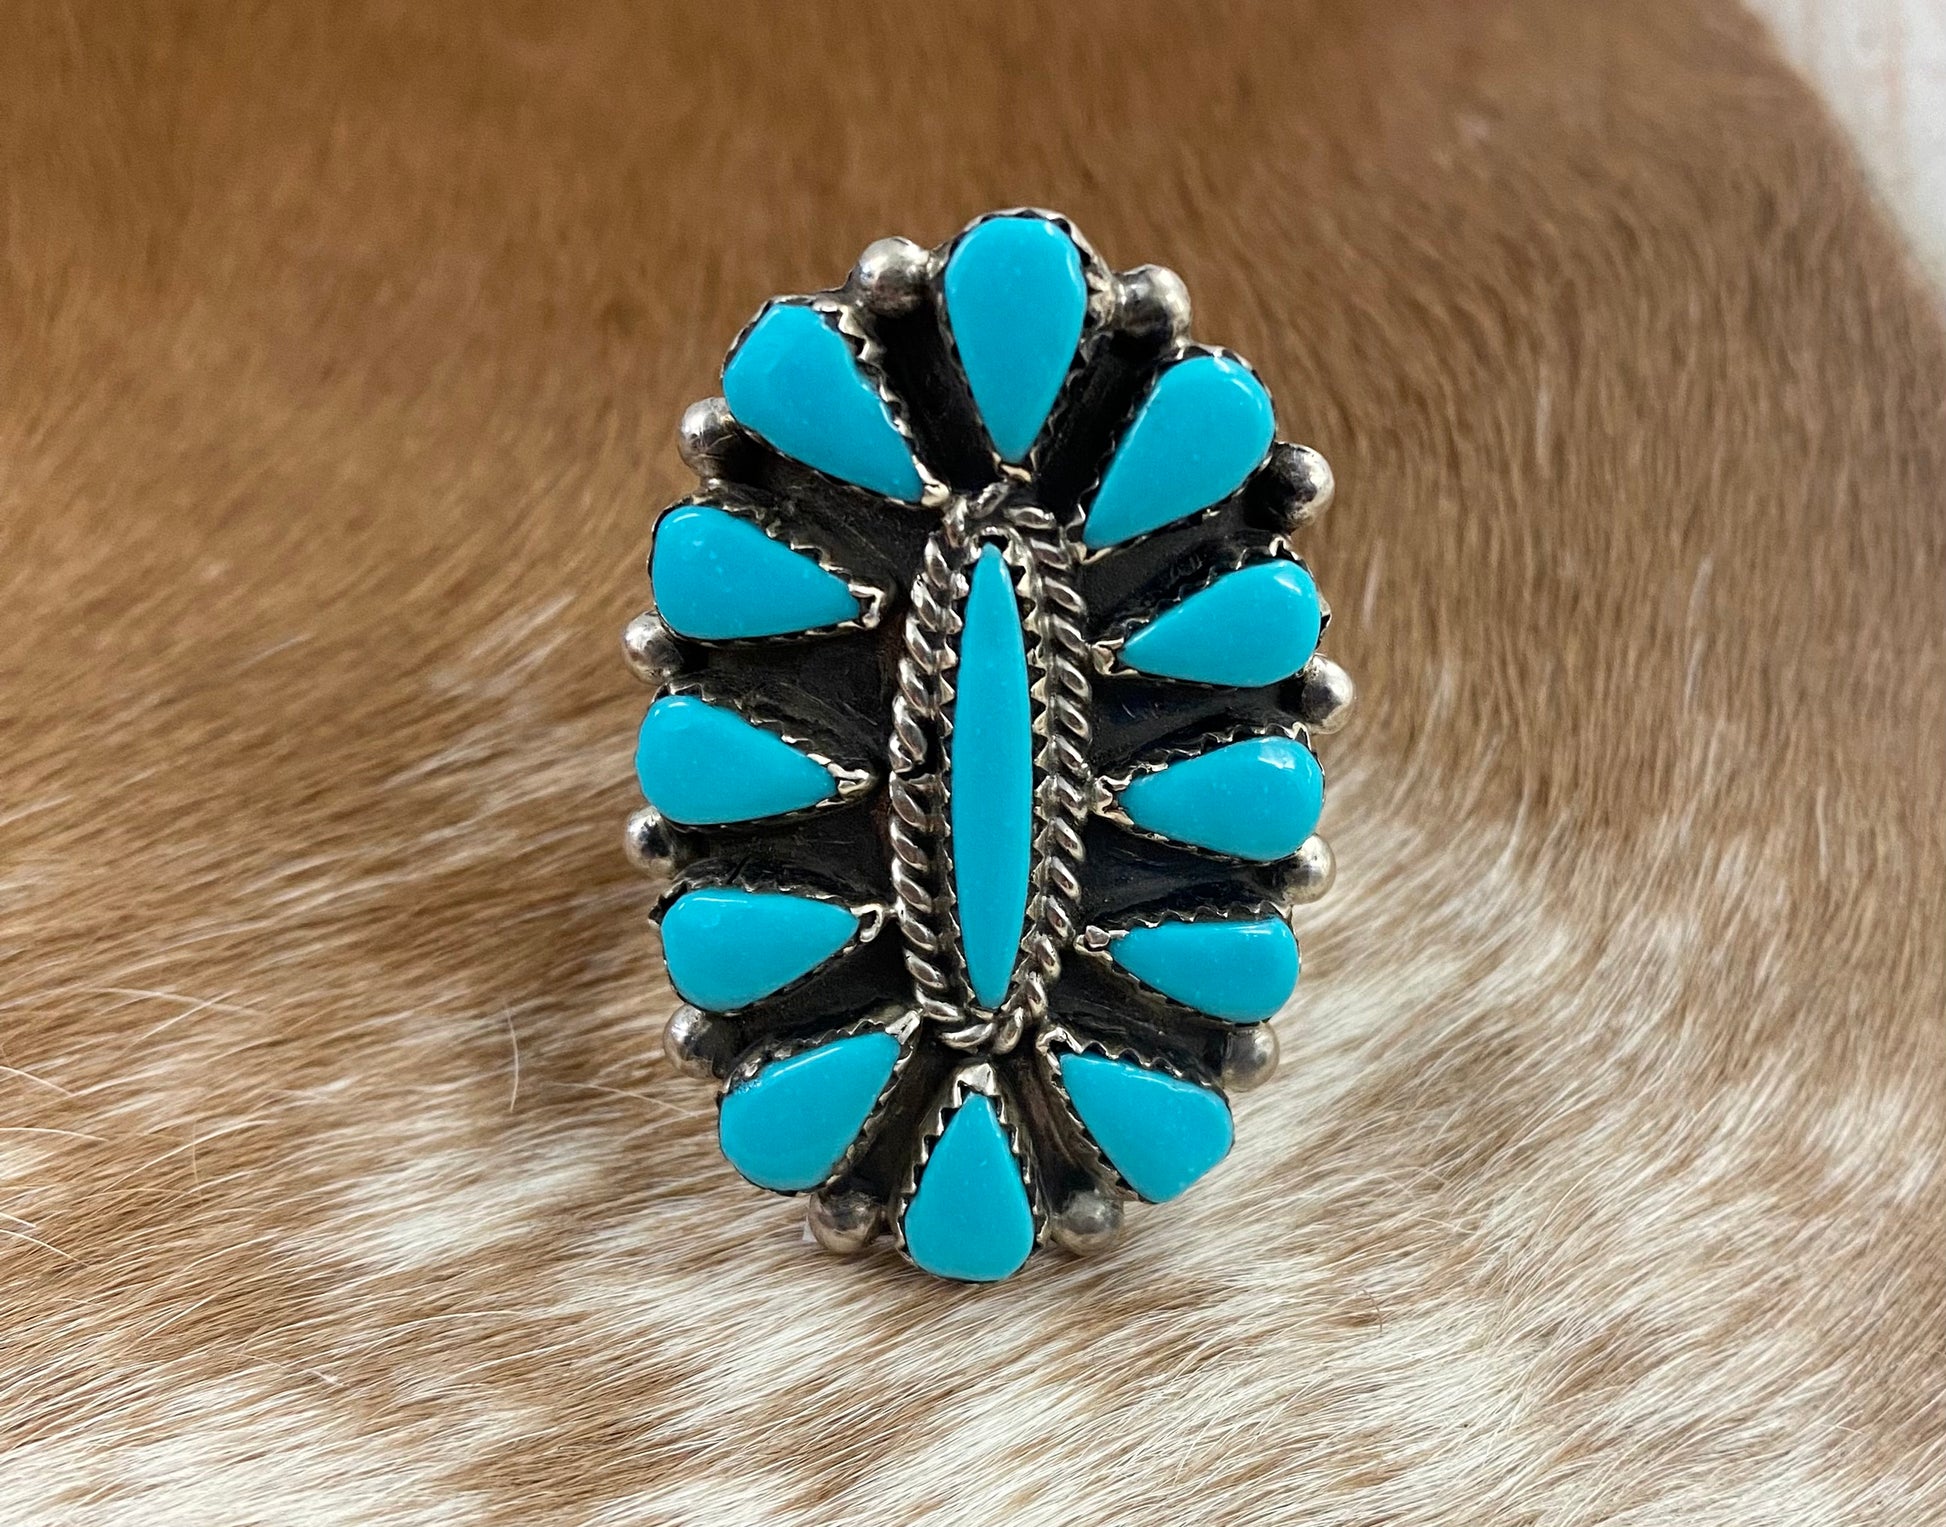 Sleeping Beauty turquoise traditional cluster sterling silver ring. Stamped sterling and signed on the back by a Zuni Native American artist silversmith. Available in size 12 1/2. The perfect piece to add to your accessory wardrobe and jewelry collection.   Size: 1.5 Inches Length X 1” Inch Width    Stone: Sleeping Beauty Turquoise   Signed: YES 